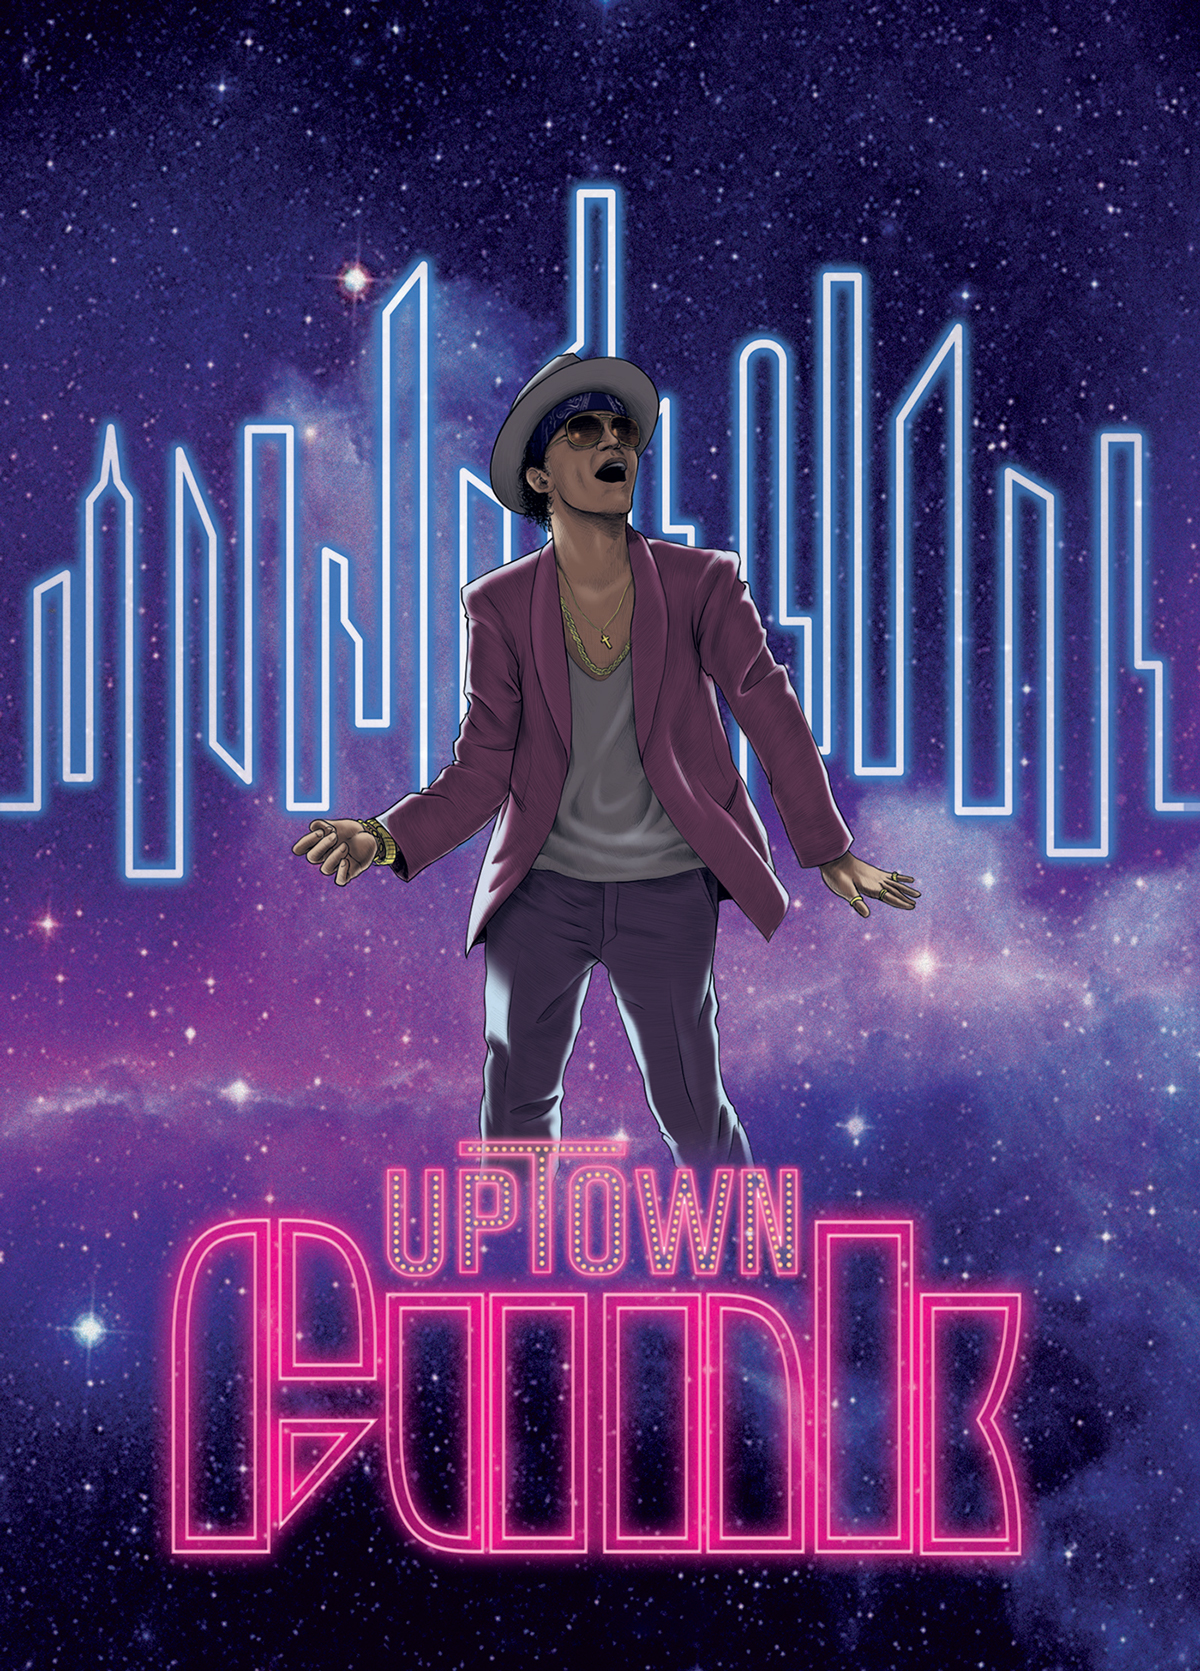 uptown funk UpTown Special Mark Ronson bruno mars funky f32193 Typeface Up town Funk You Up tribute poster